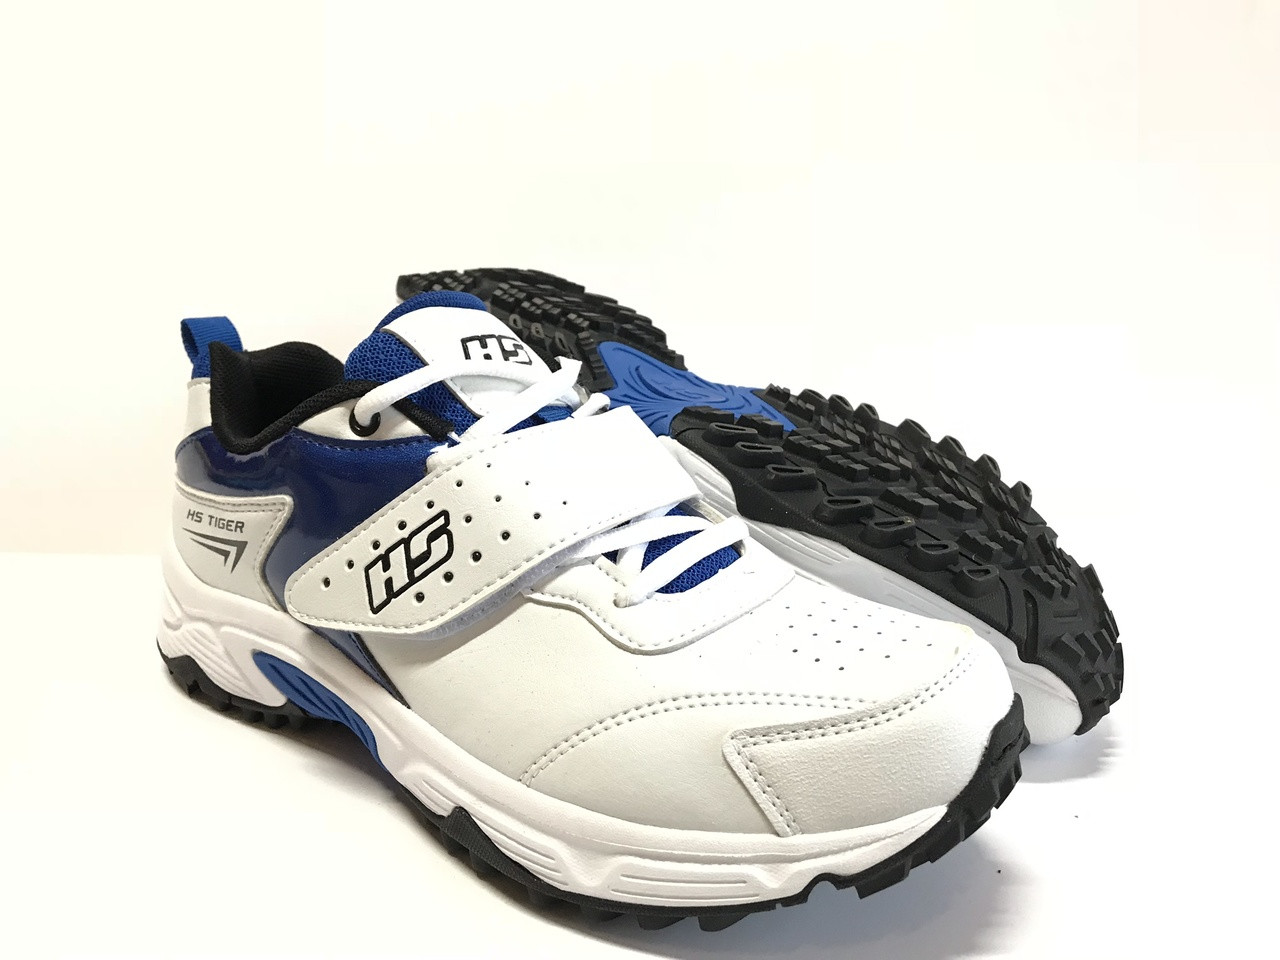 sports shoes for cricket